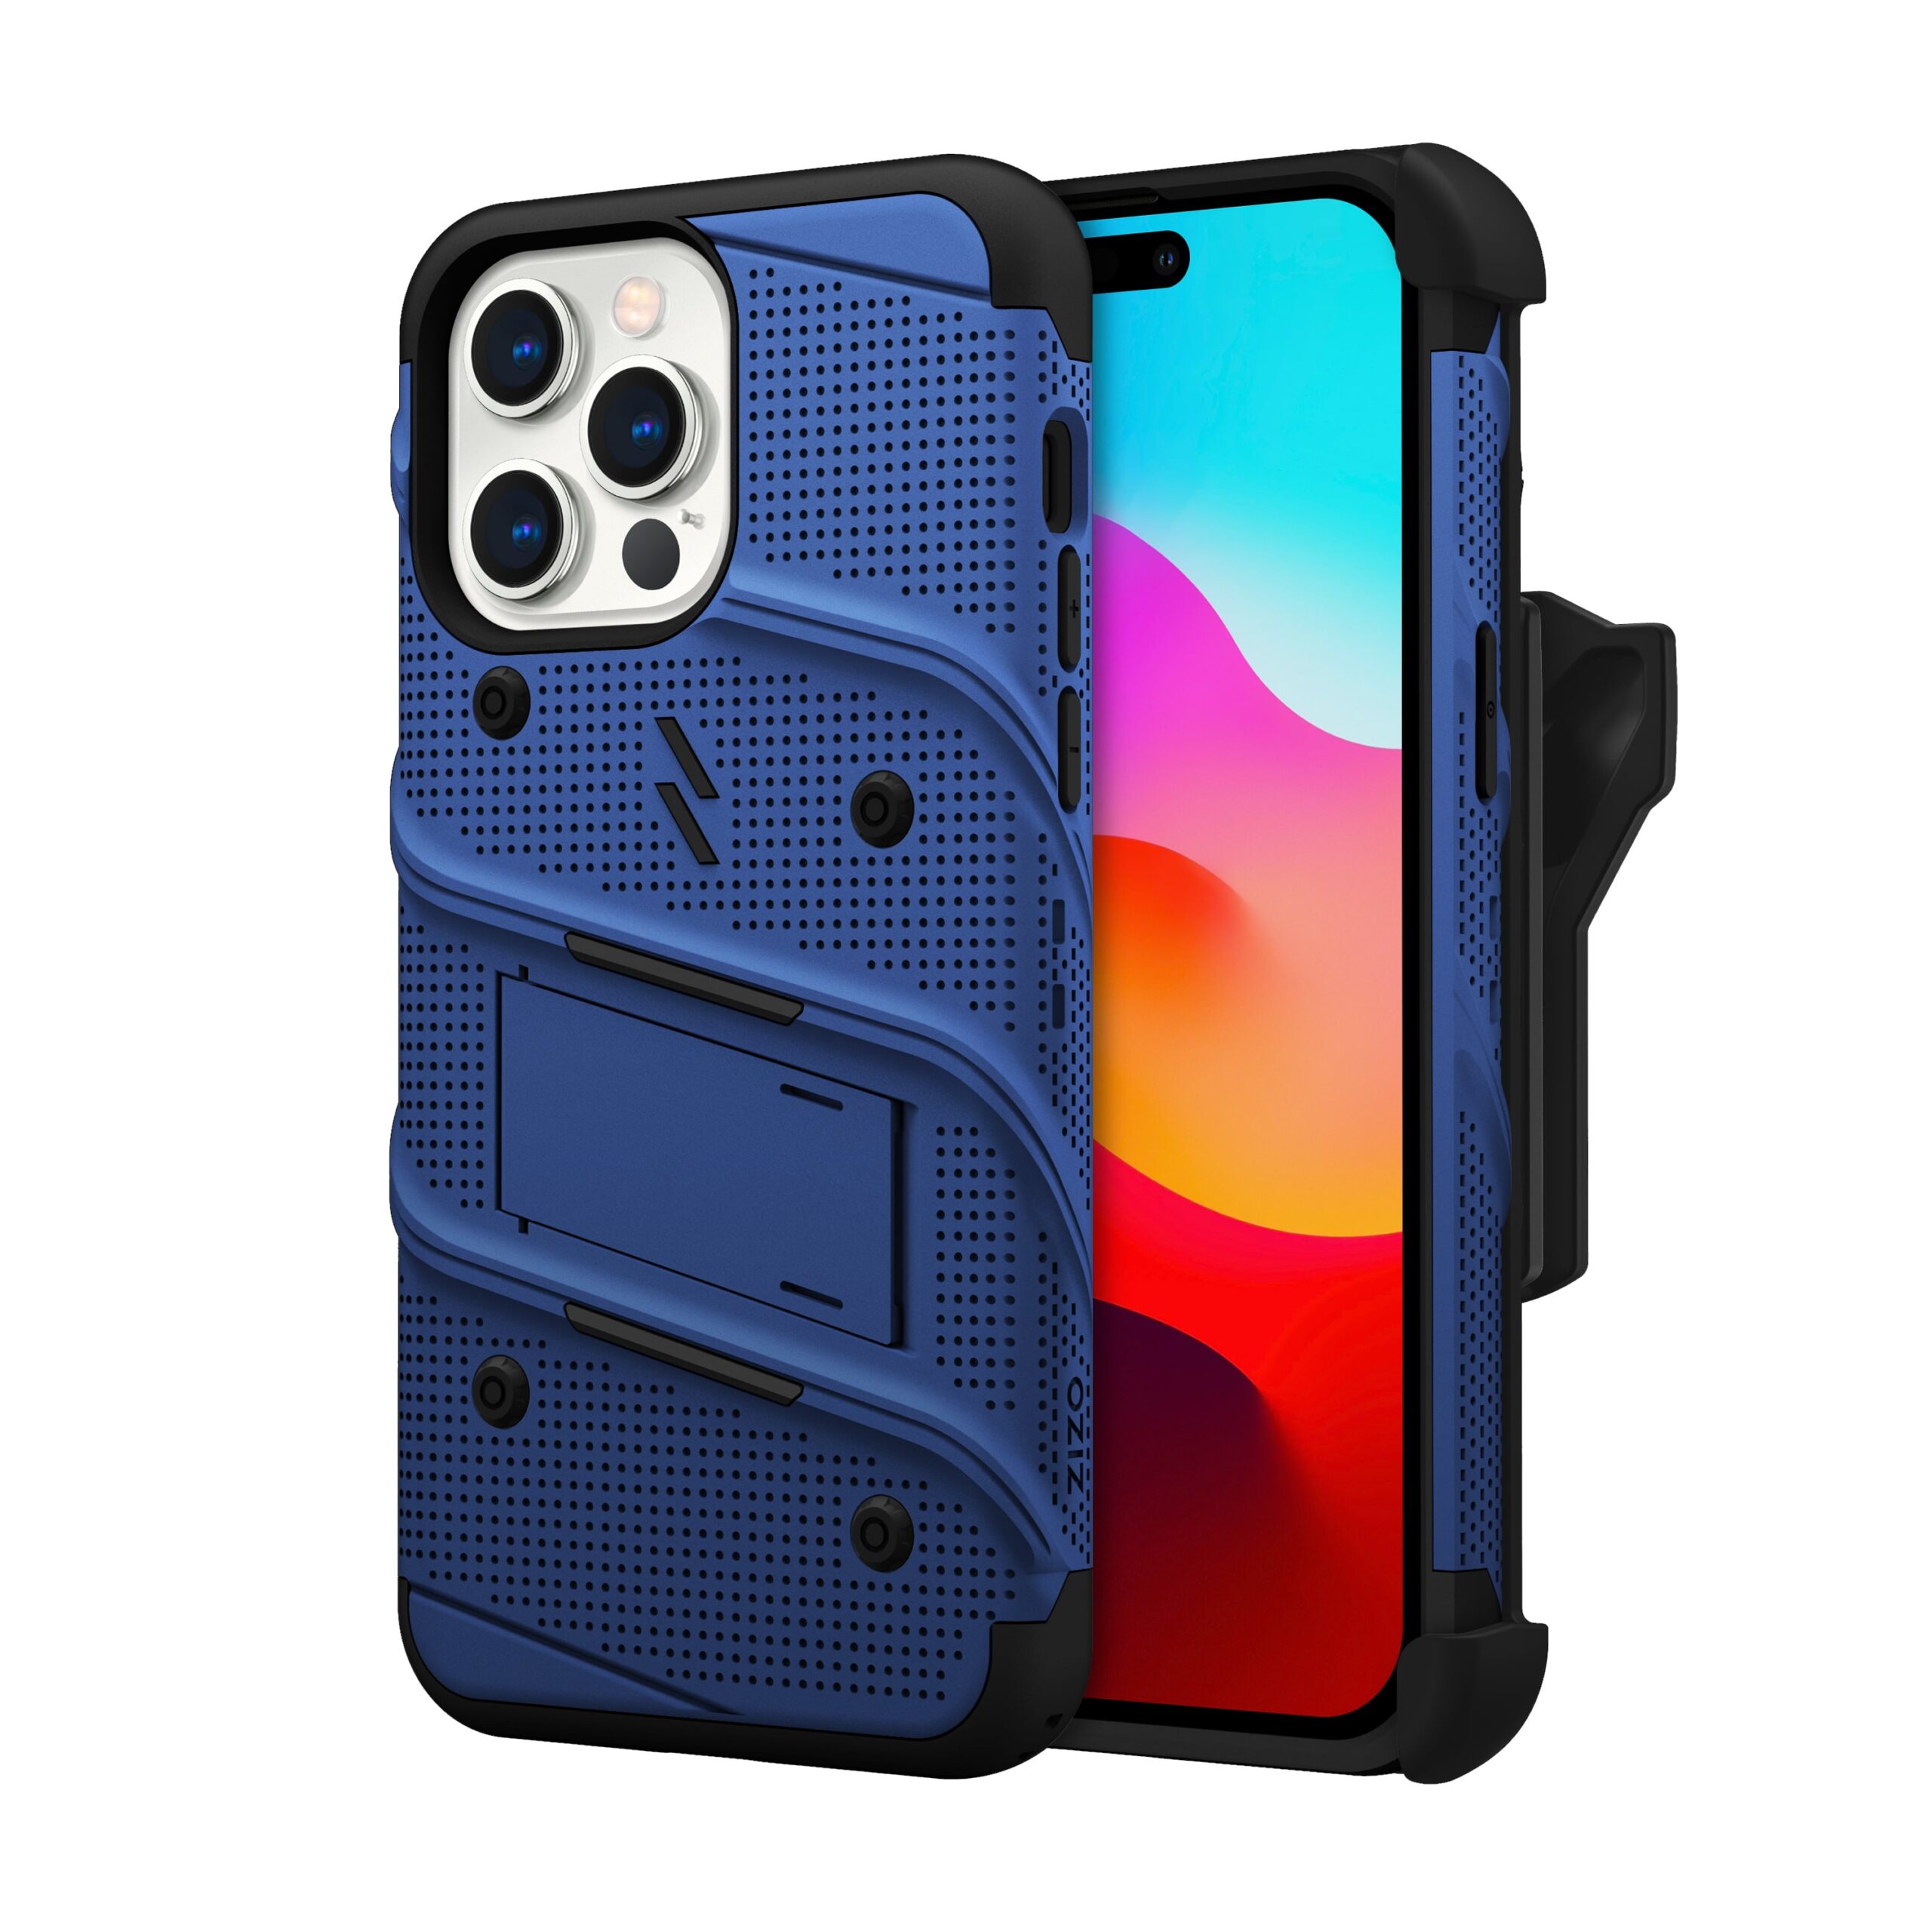 Zizo Bolt Bundle Apple iPhone 15 Pro Max Holster Case with Tempered Glass, Kickstand & Lanyard, Protective & Light Weight - Blue